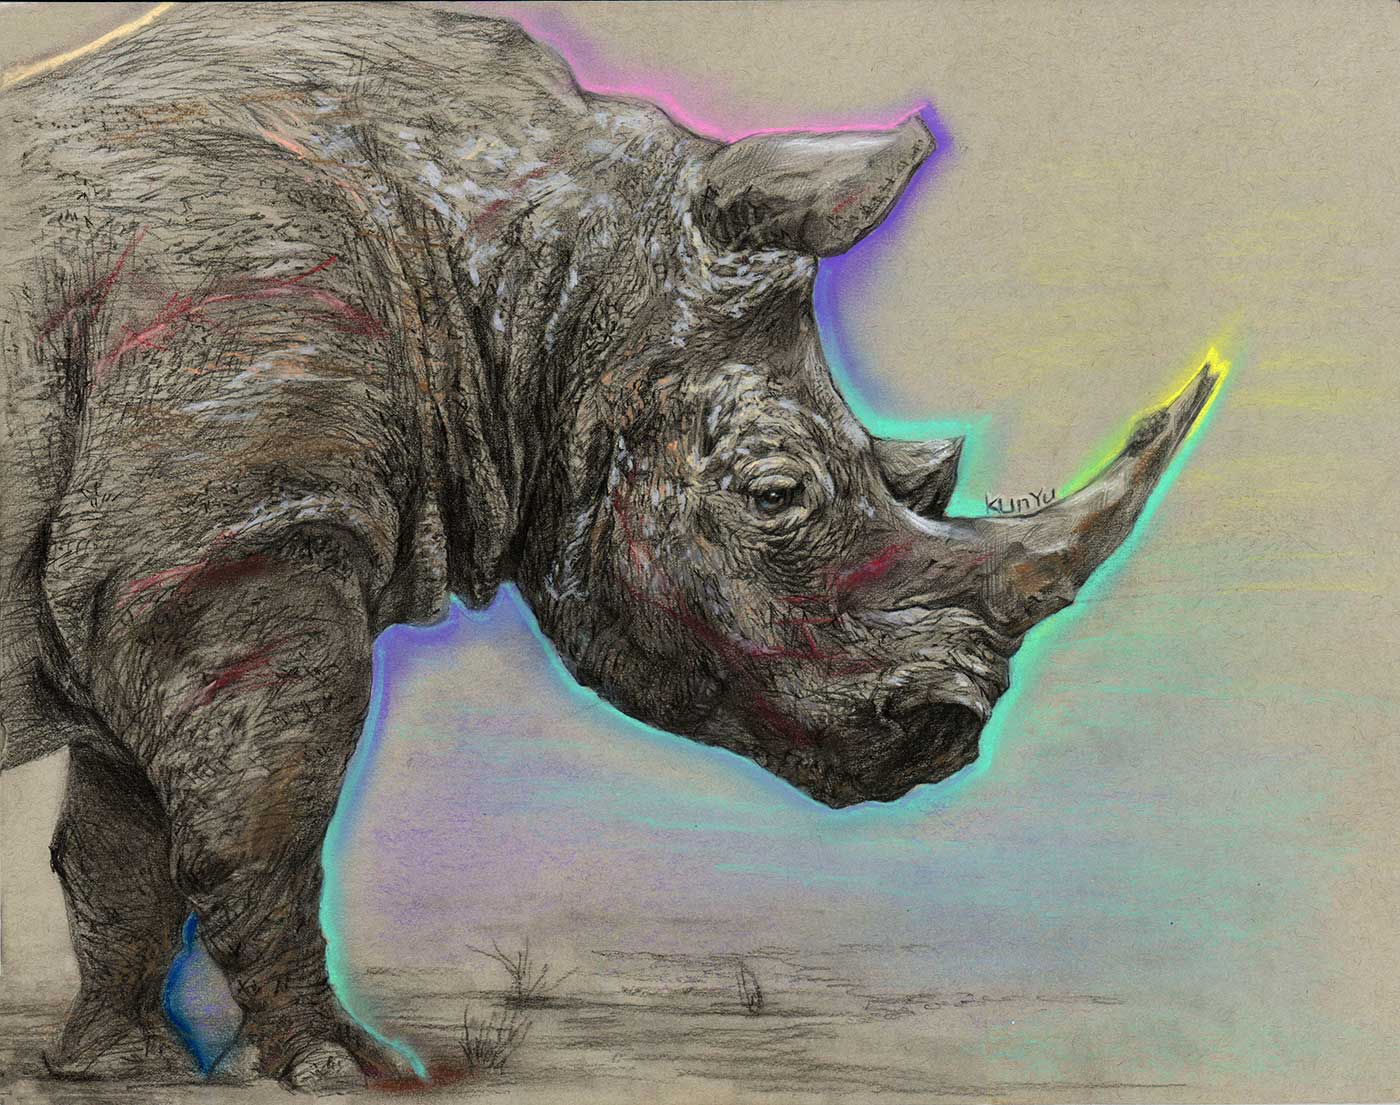 Drawing of a rhinoceros with a colorful line around its silhouette.